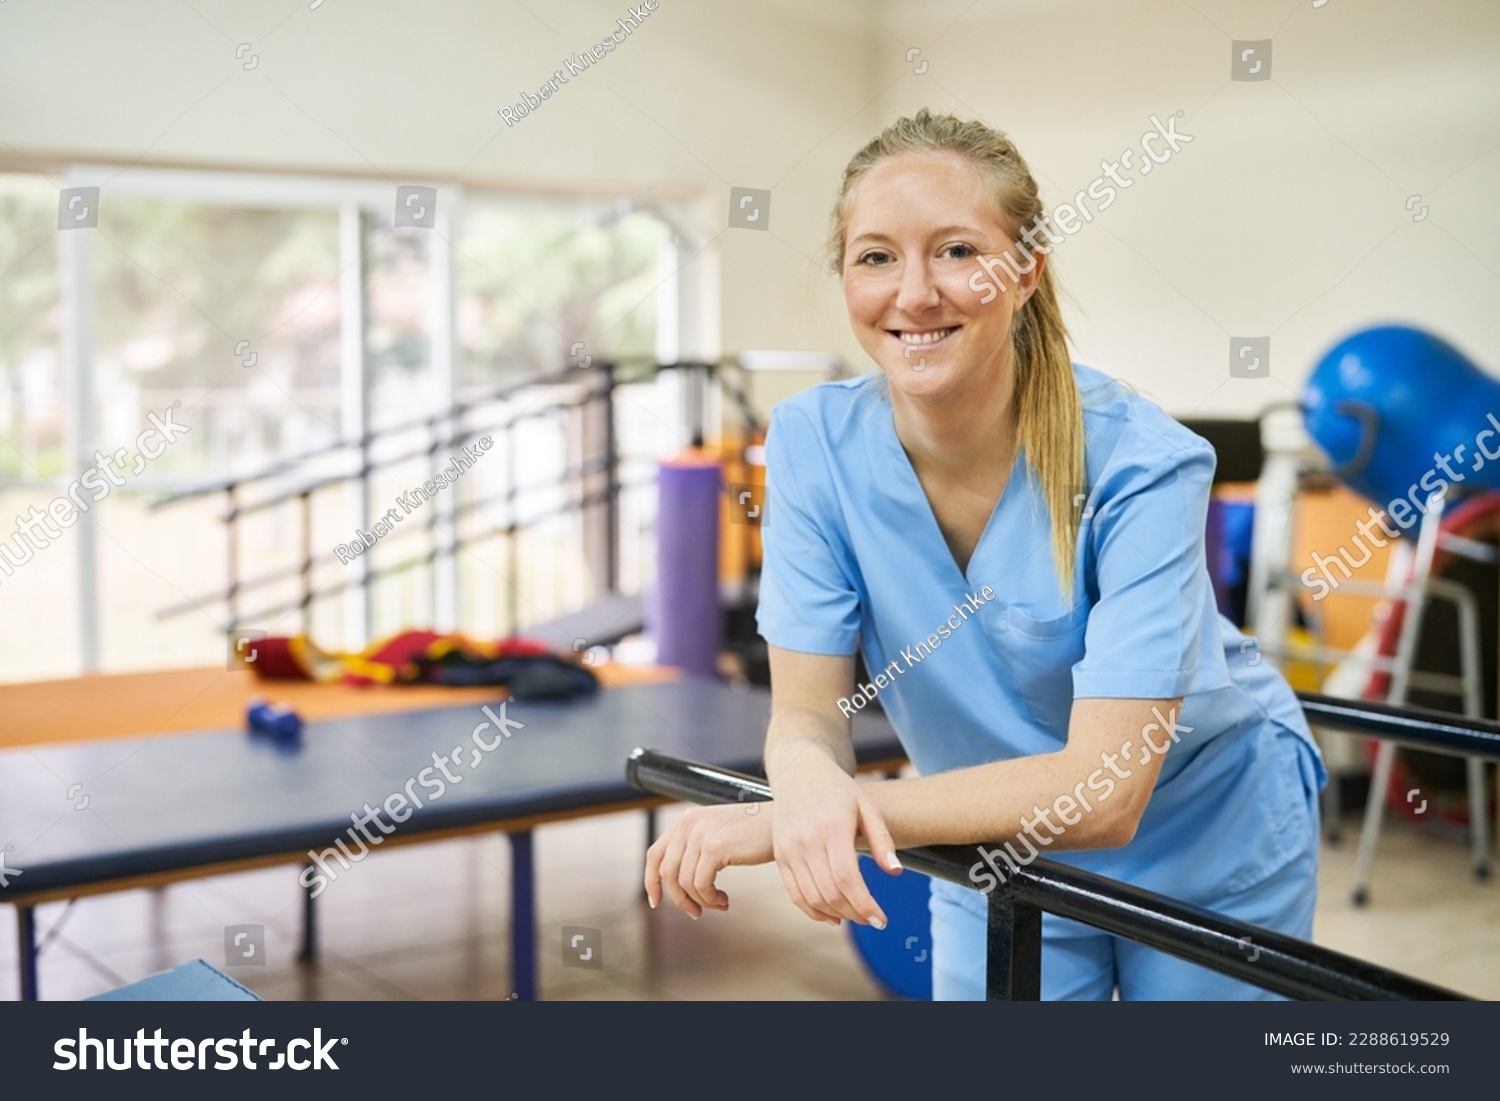 Smiling young woman as physiotherapist standing in gym of nursing home #2288619529